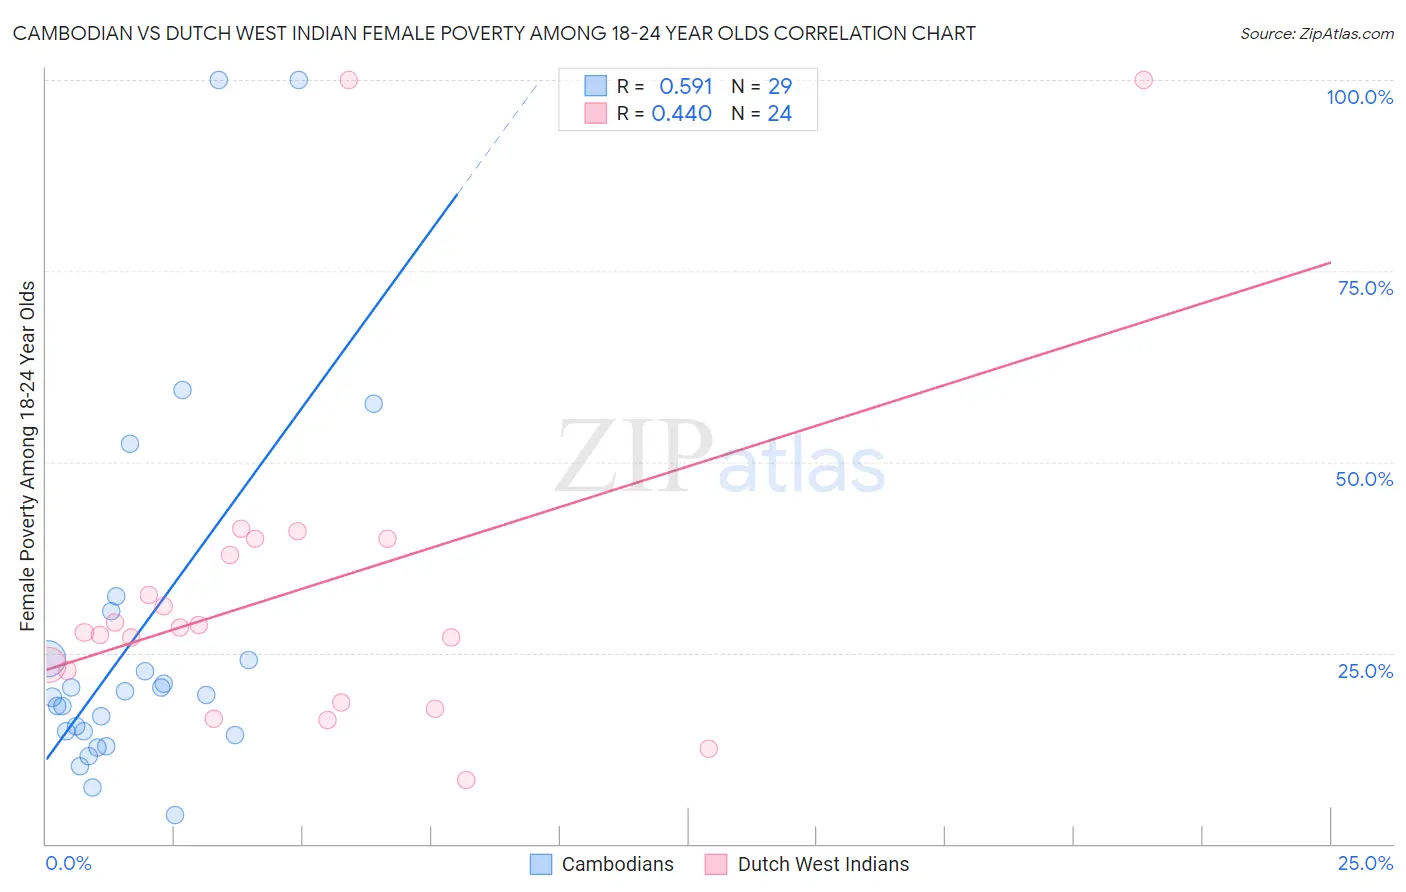 Cambodian vs Dutch West Indian Female Poverty Among 18-24 Year Olds